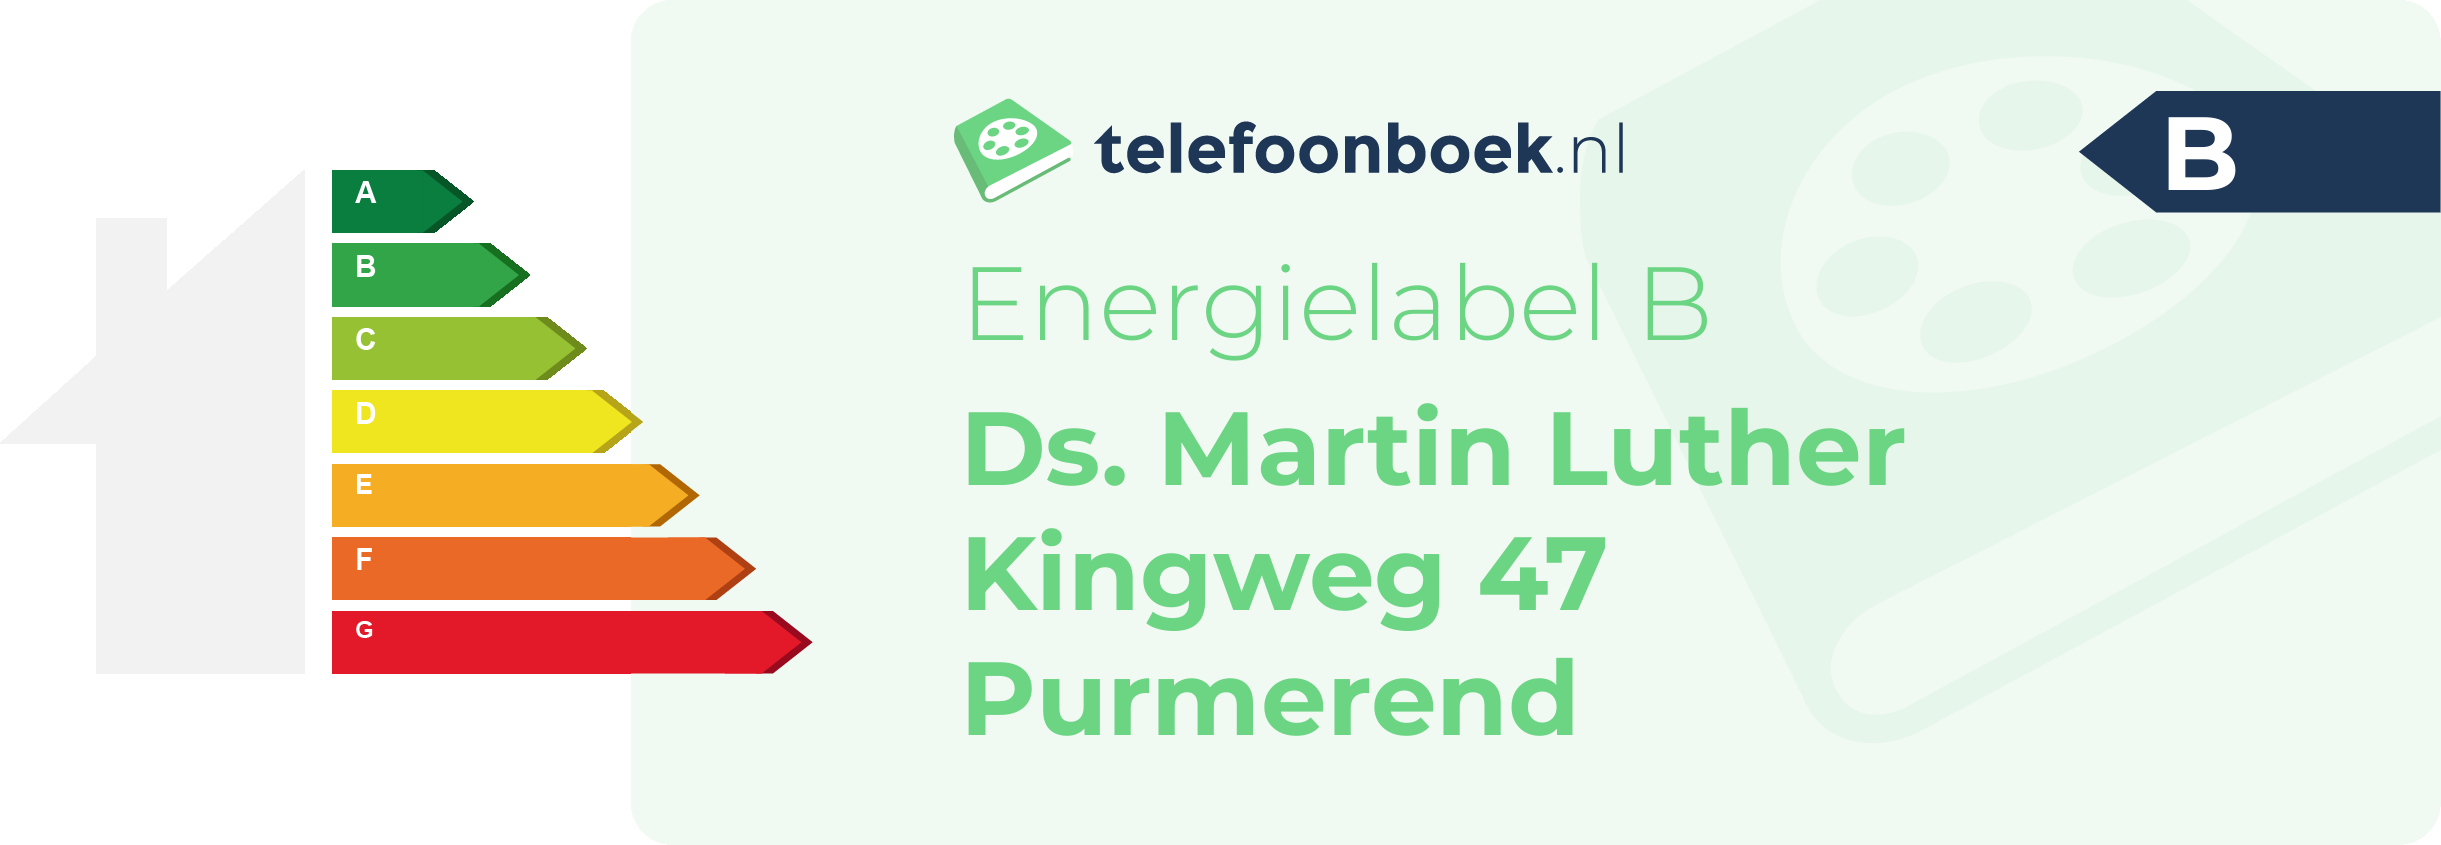 Energielabel Ds. Martin Luther Kingweg 47 Purmerend